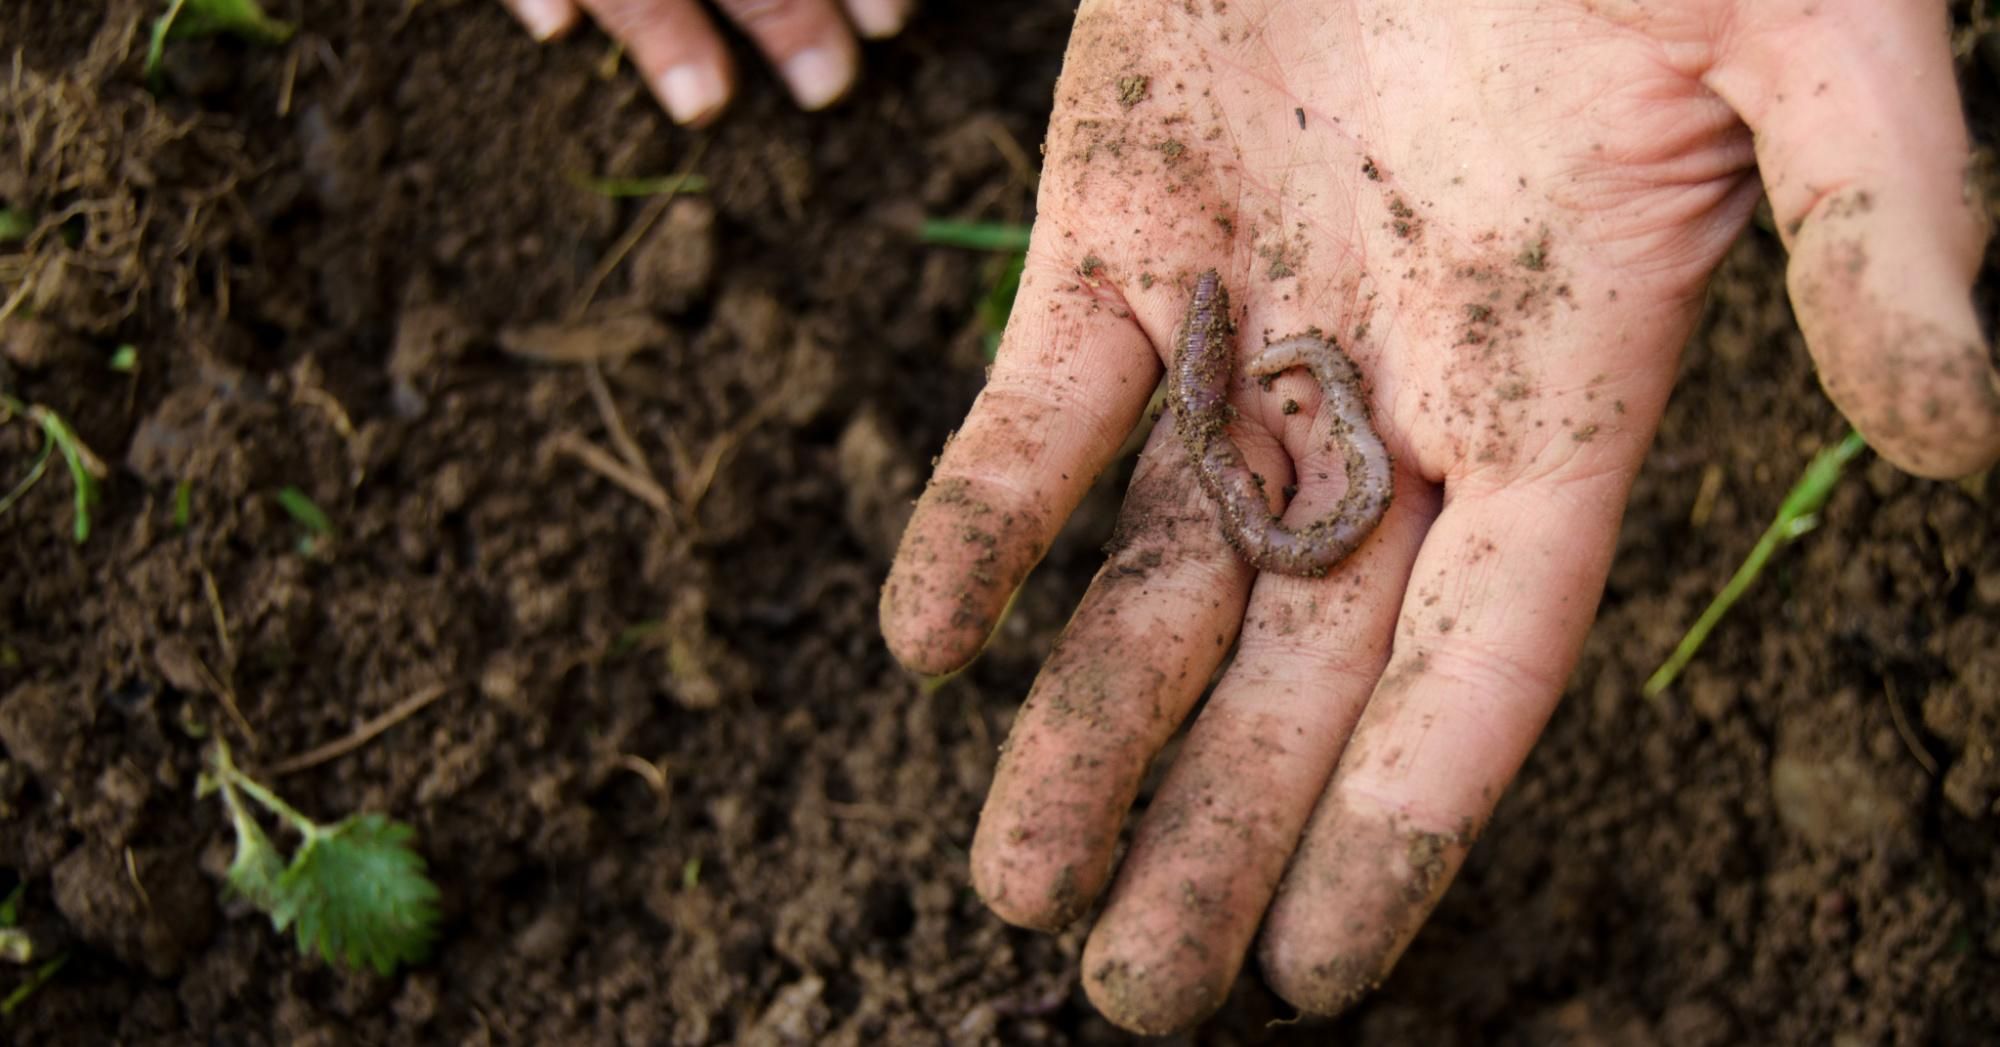 "Beetles and springtails have enormous impacts on the porosity of soil and are really getting hammered, and earthworms are definitely getting hit as well," said study co-author Nathan Donley, a scientist at the Center for Biological Diversity. (Photo: zianlob/Getty Images)